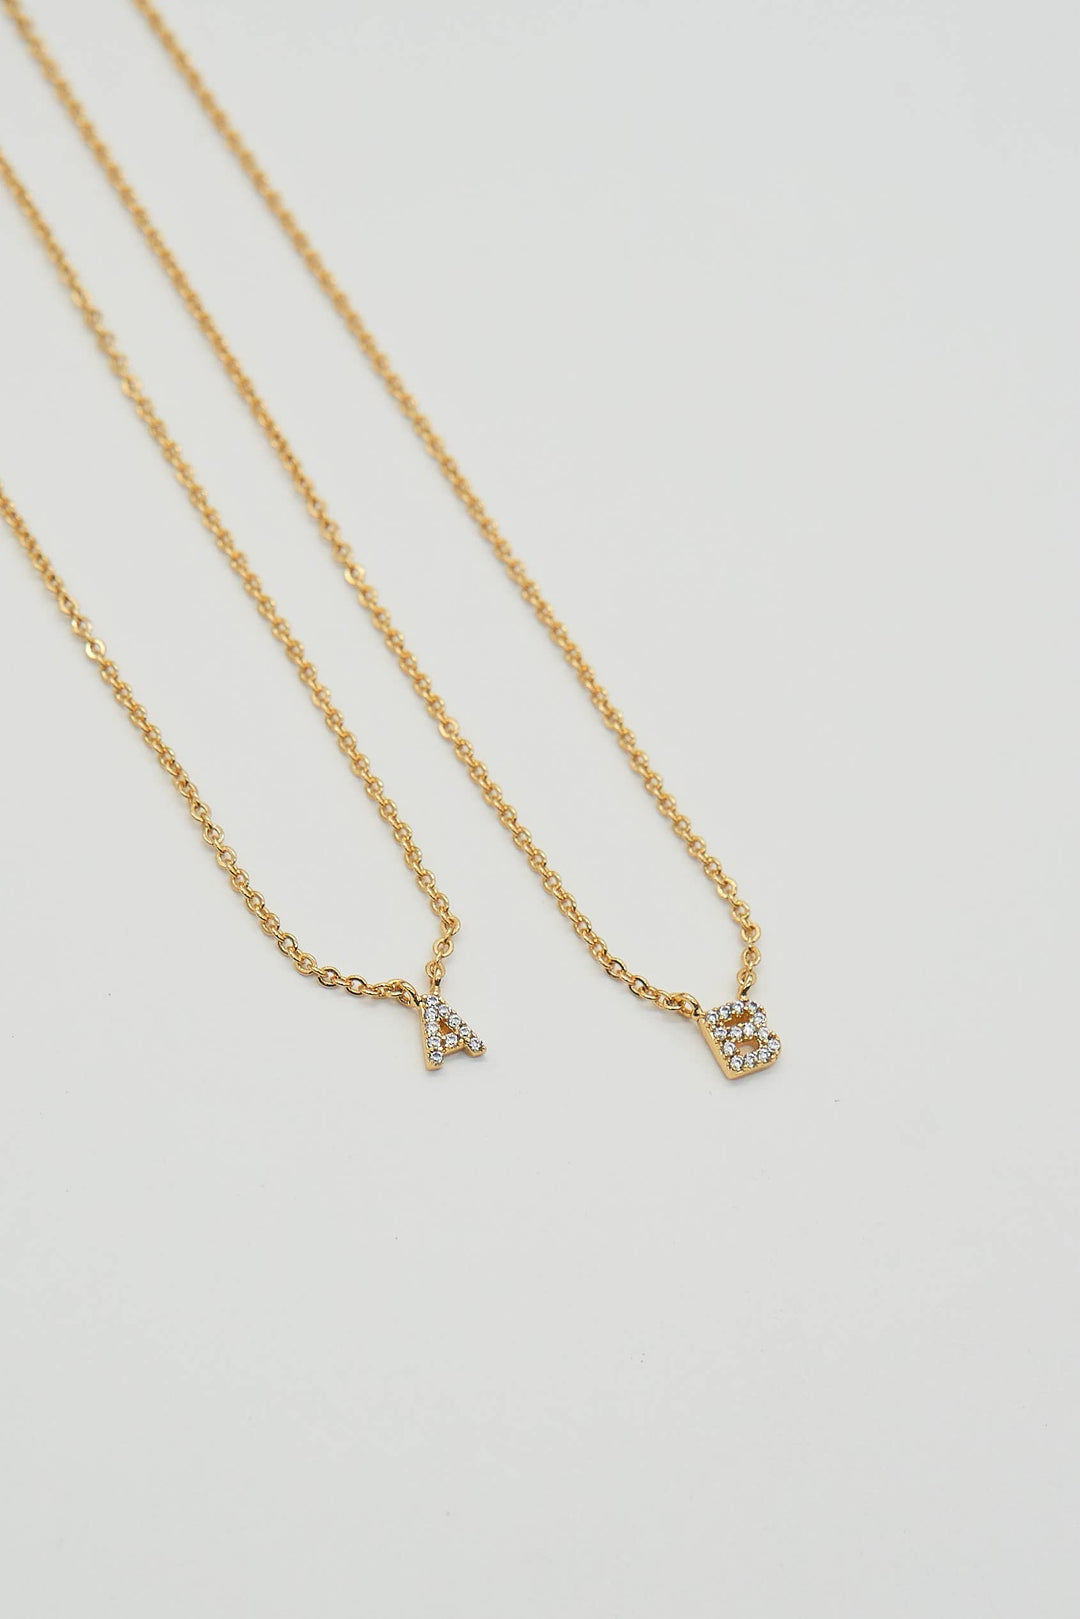 Shiny Initial Necklace: Holiday Favorite!: H